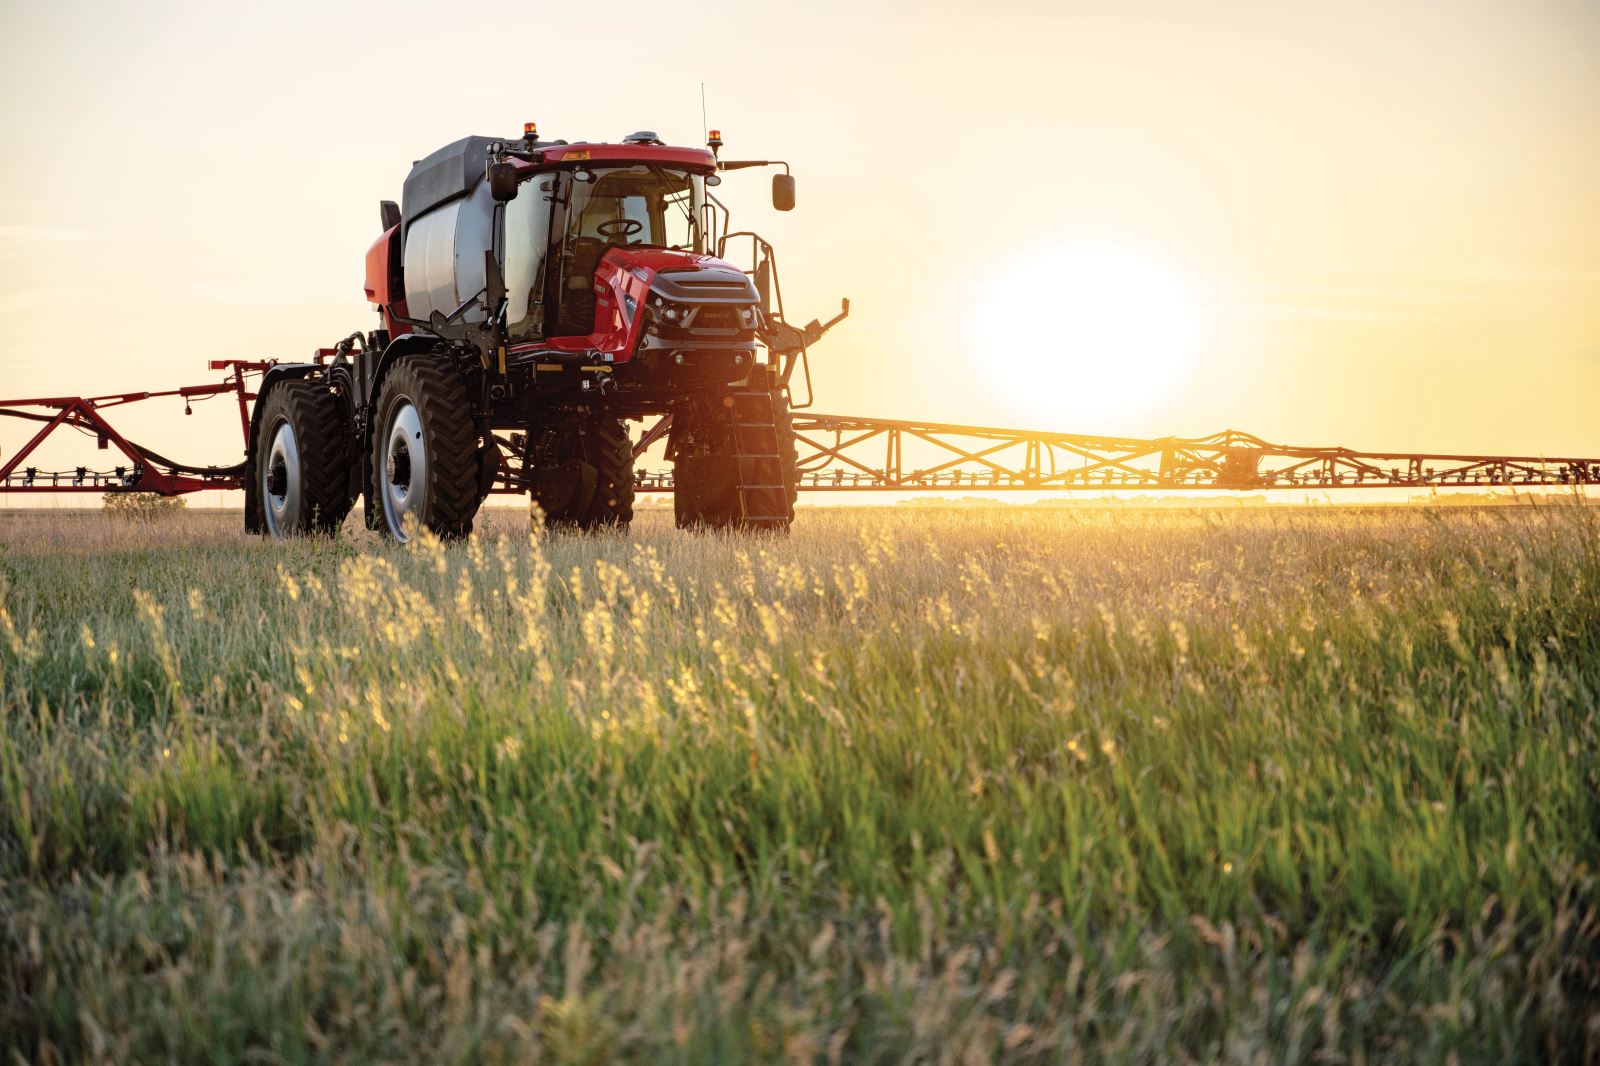 The New Steiger 715 Headlines a Year of Breakthrough Tractor Innovation  from Case IH